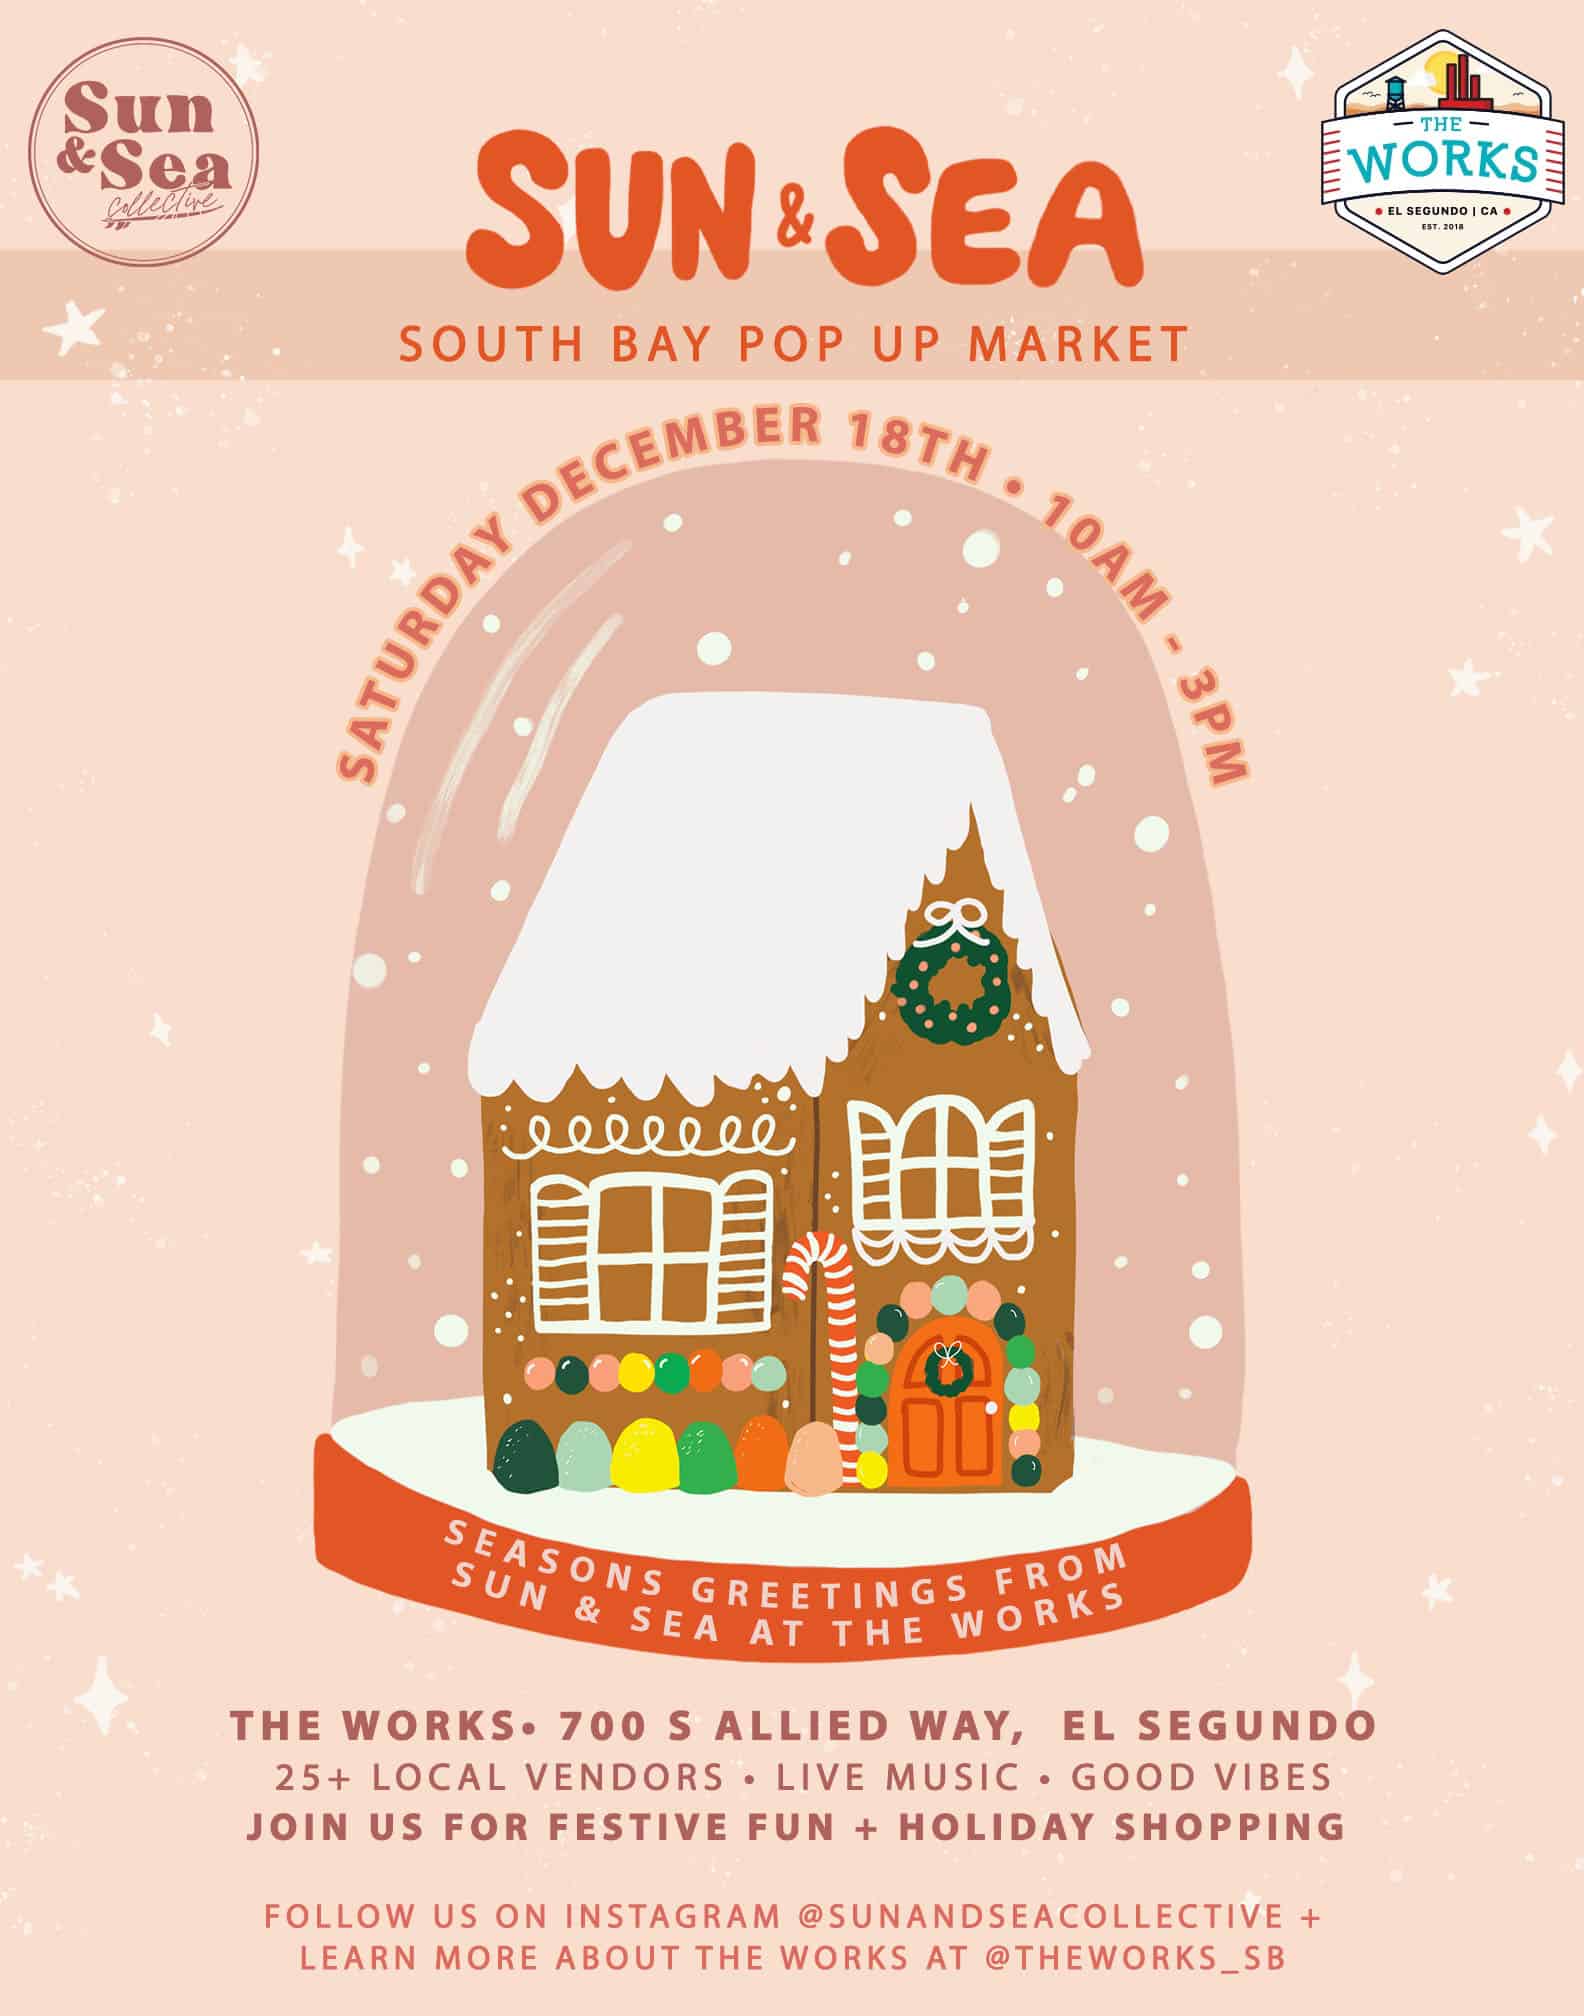 Sun & Sea Holiday Pup Up Market at The Works in Southbay